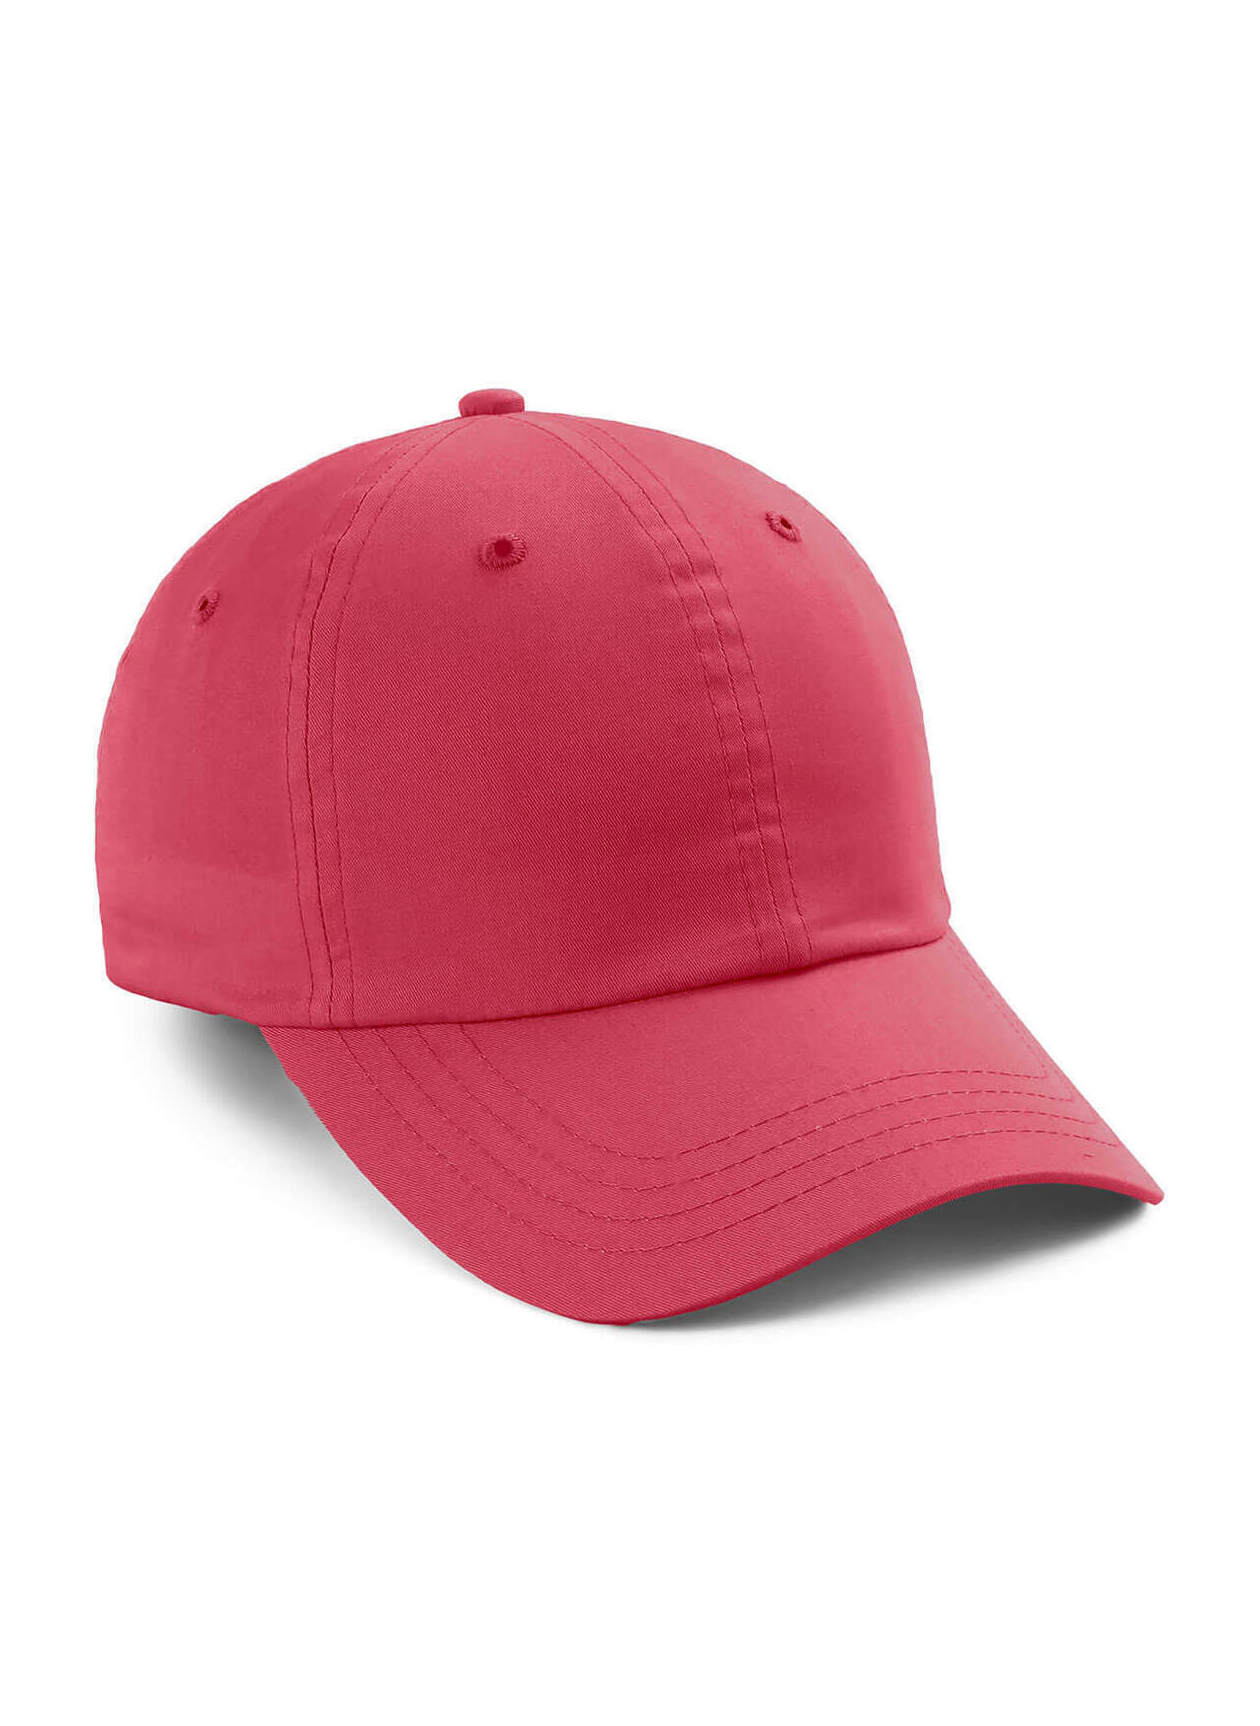 Imperial Nantucket Red The Zero Lightweight Cotton Hat